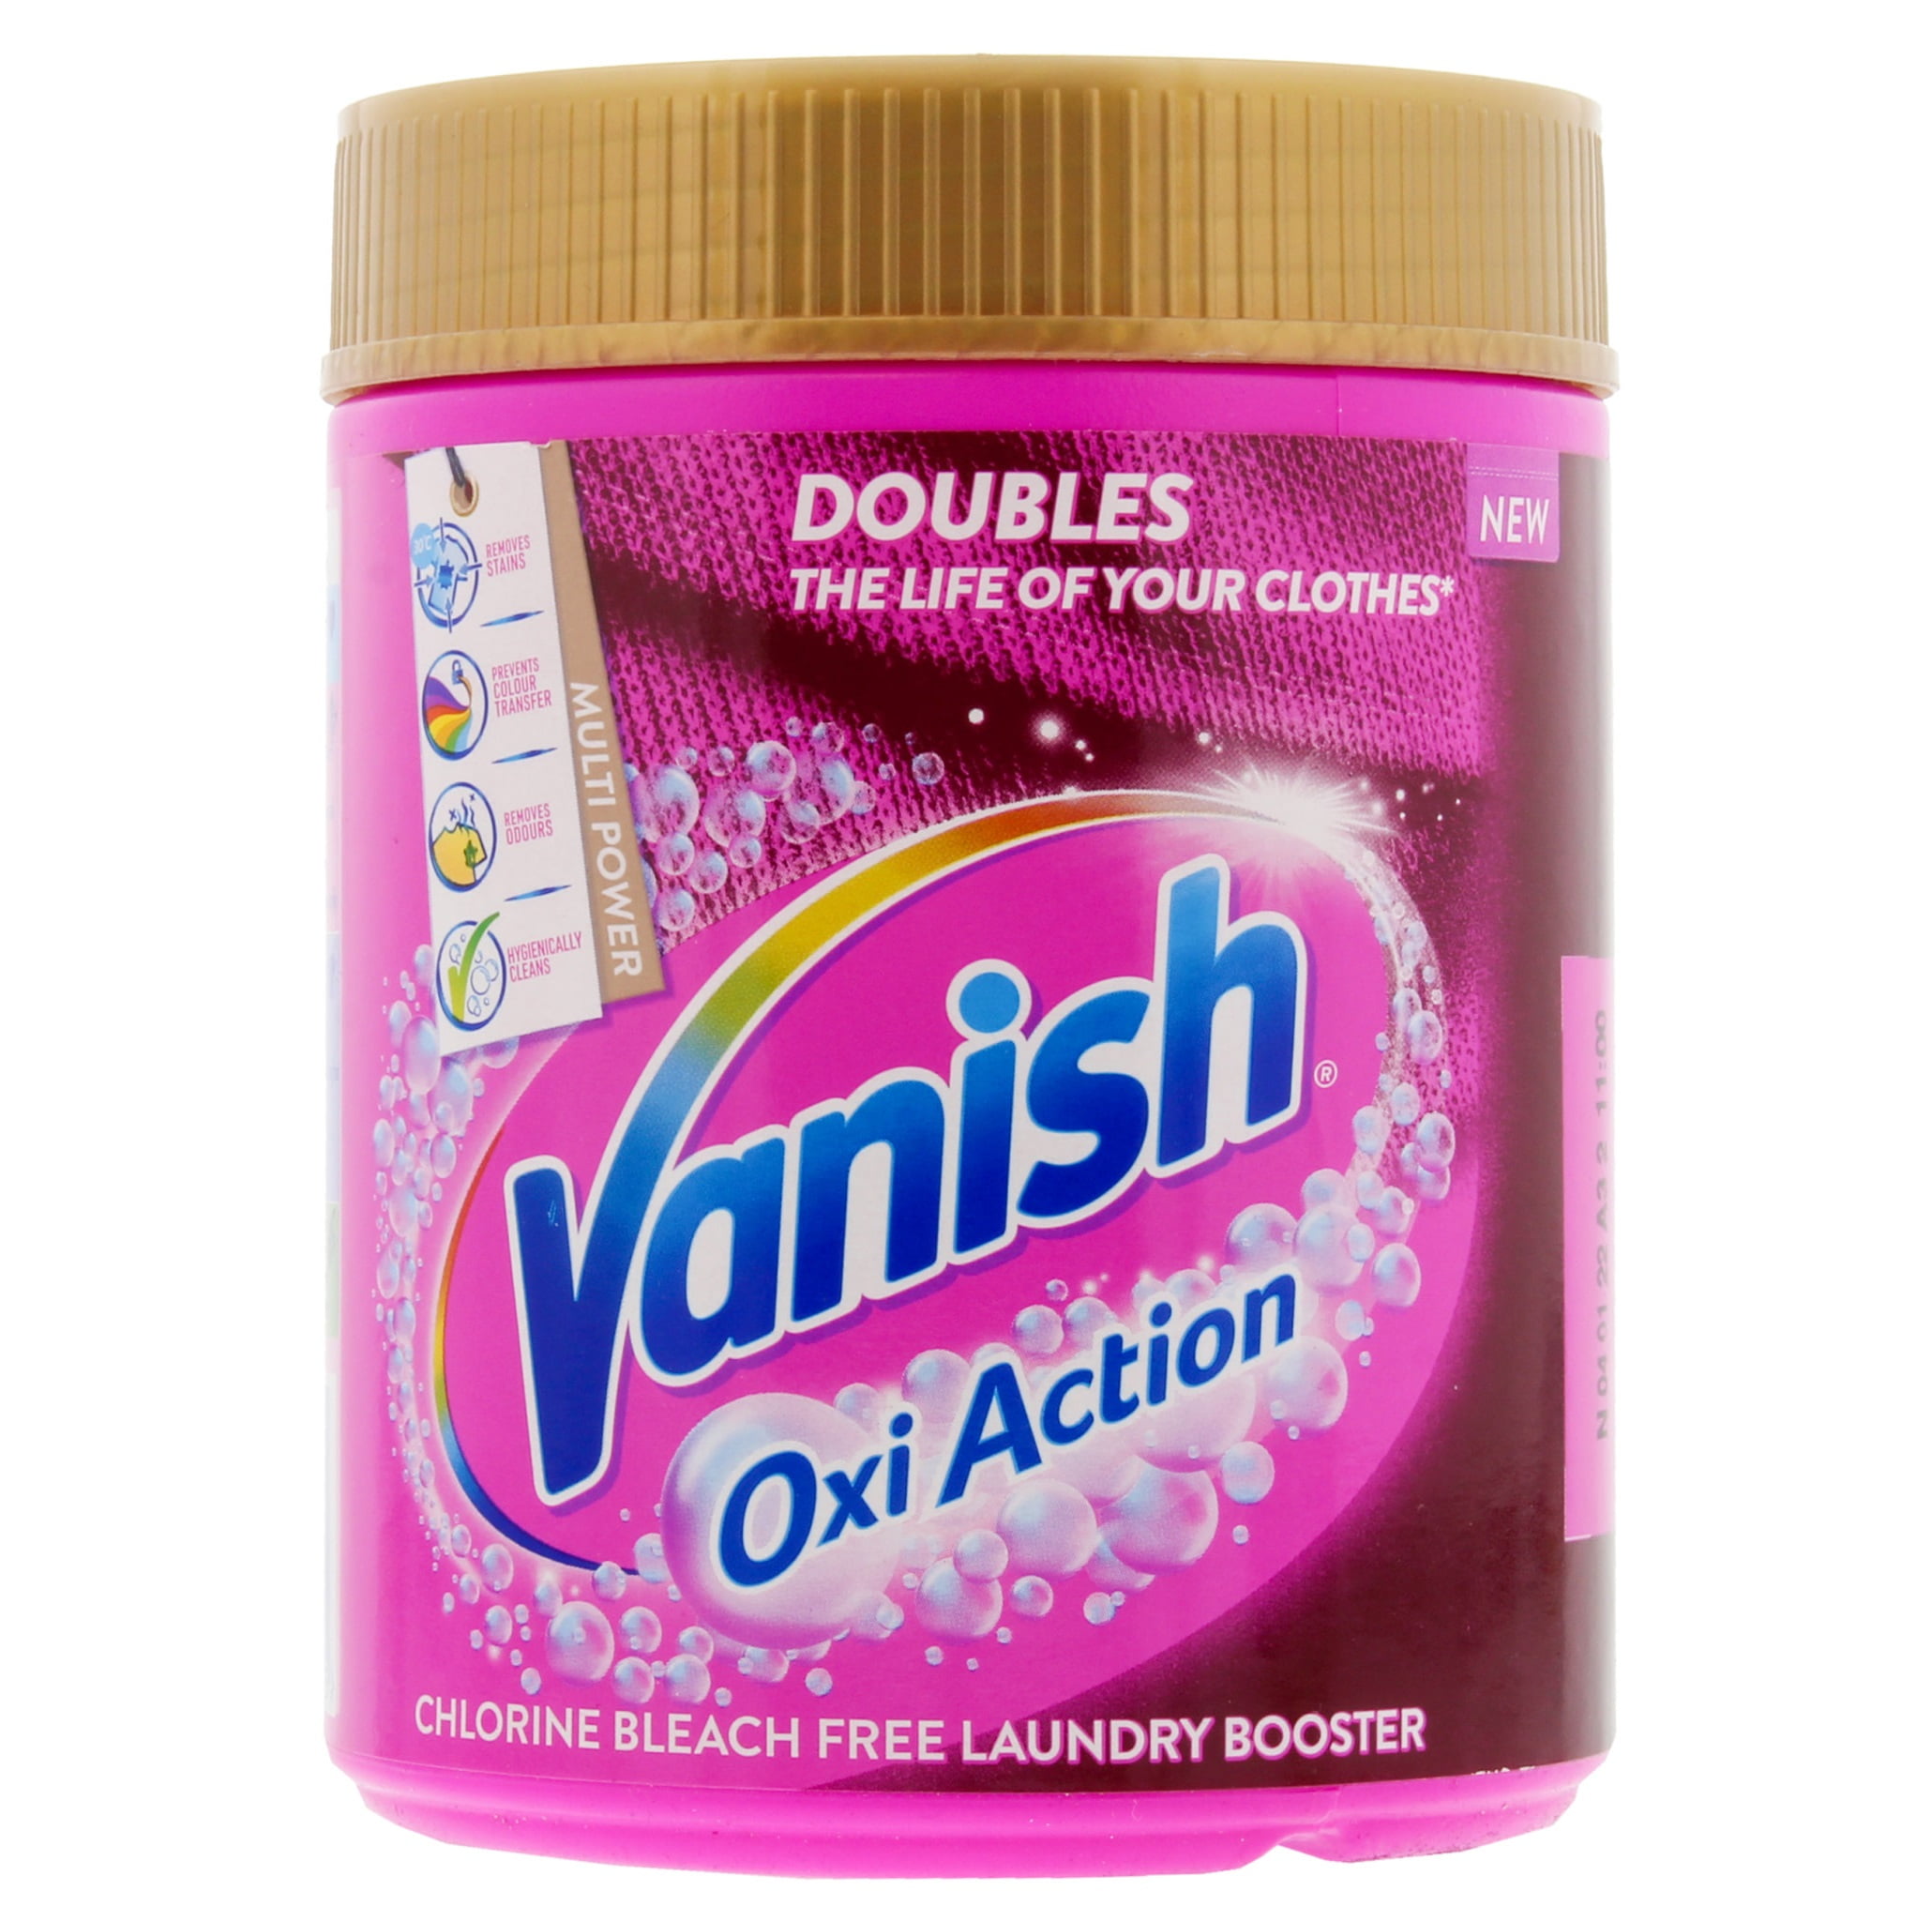 Vanish Gold Oxi Action Stain Remover Powder 1.4 Kg